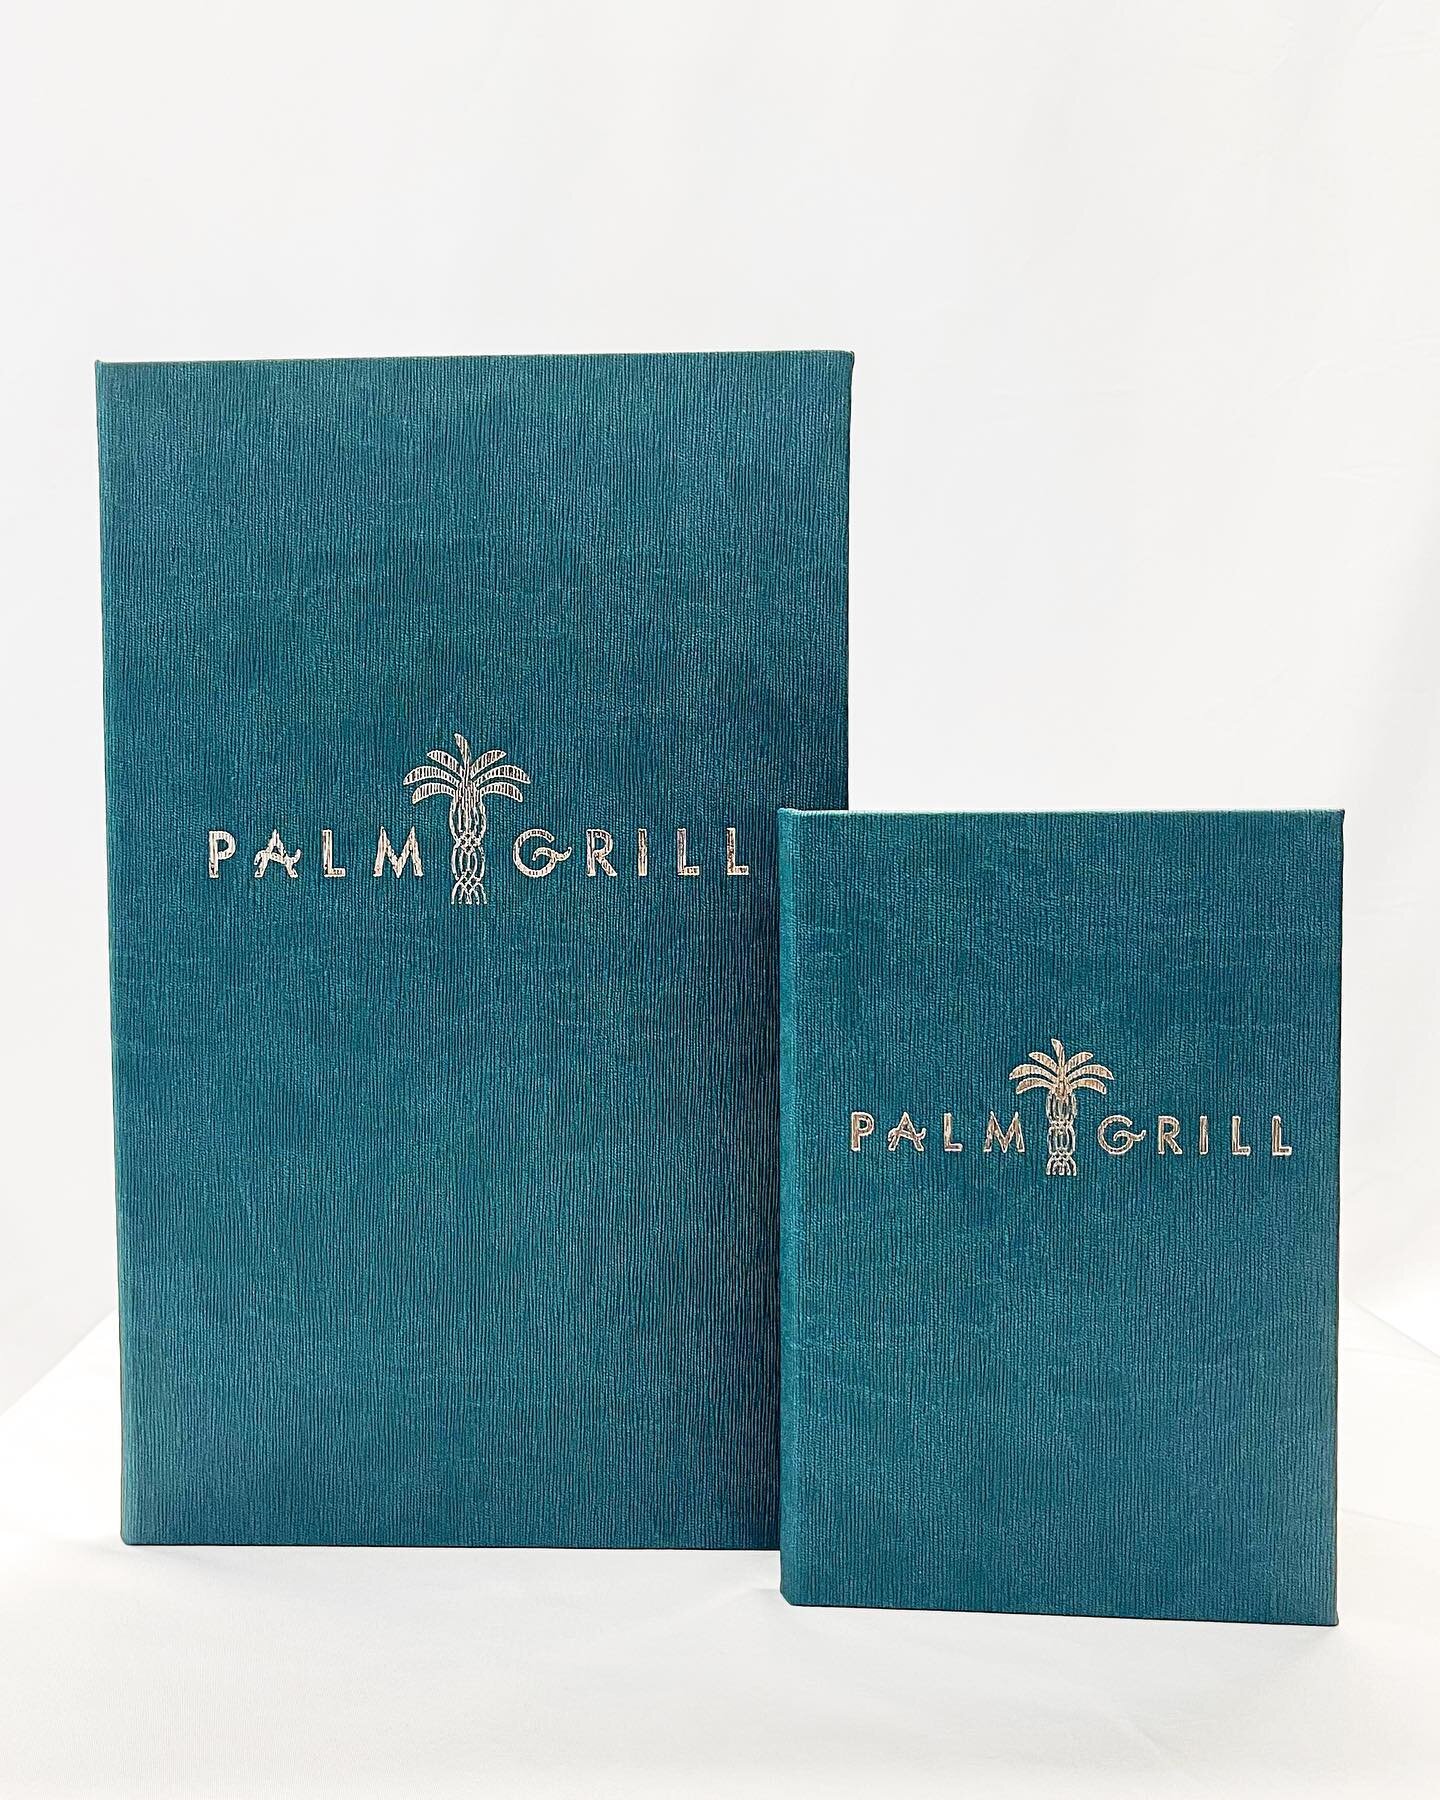 Feeling all the summer vibes from our new Turquoise Vienna Menu Covers for Palm Grill ☀️🌴

#rischmenucovers #menus #restaurant #branding #marketing #hospitality #menucovers #menudesign #design #summer #foodie #handmade #handcrafted #madeintheusa